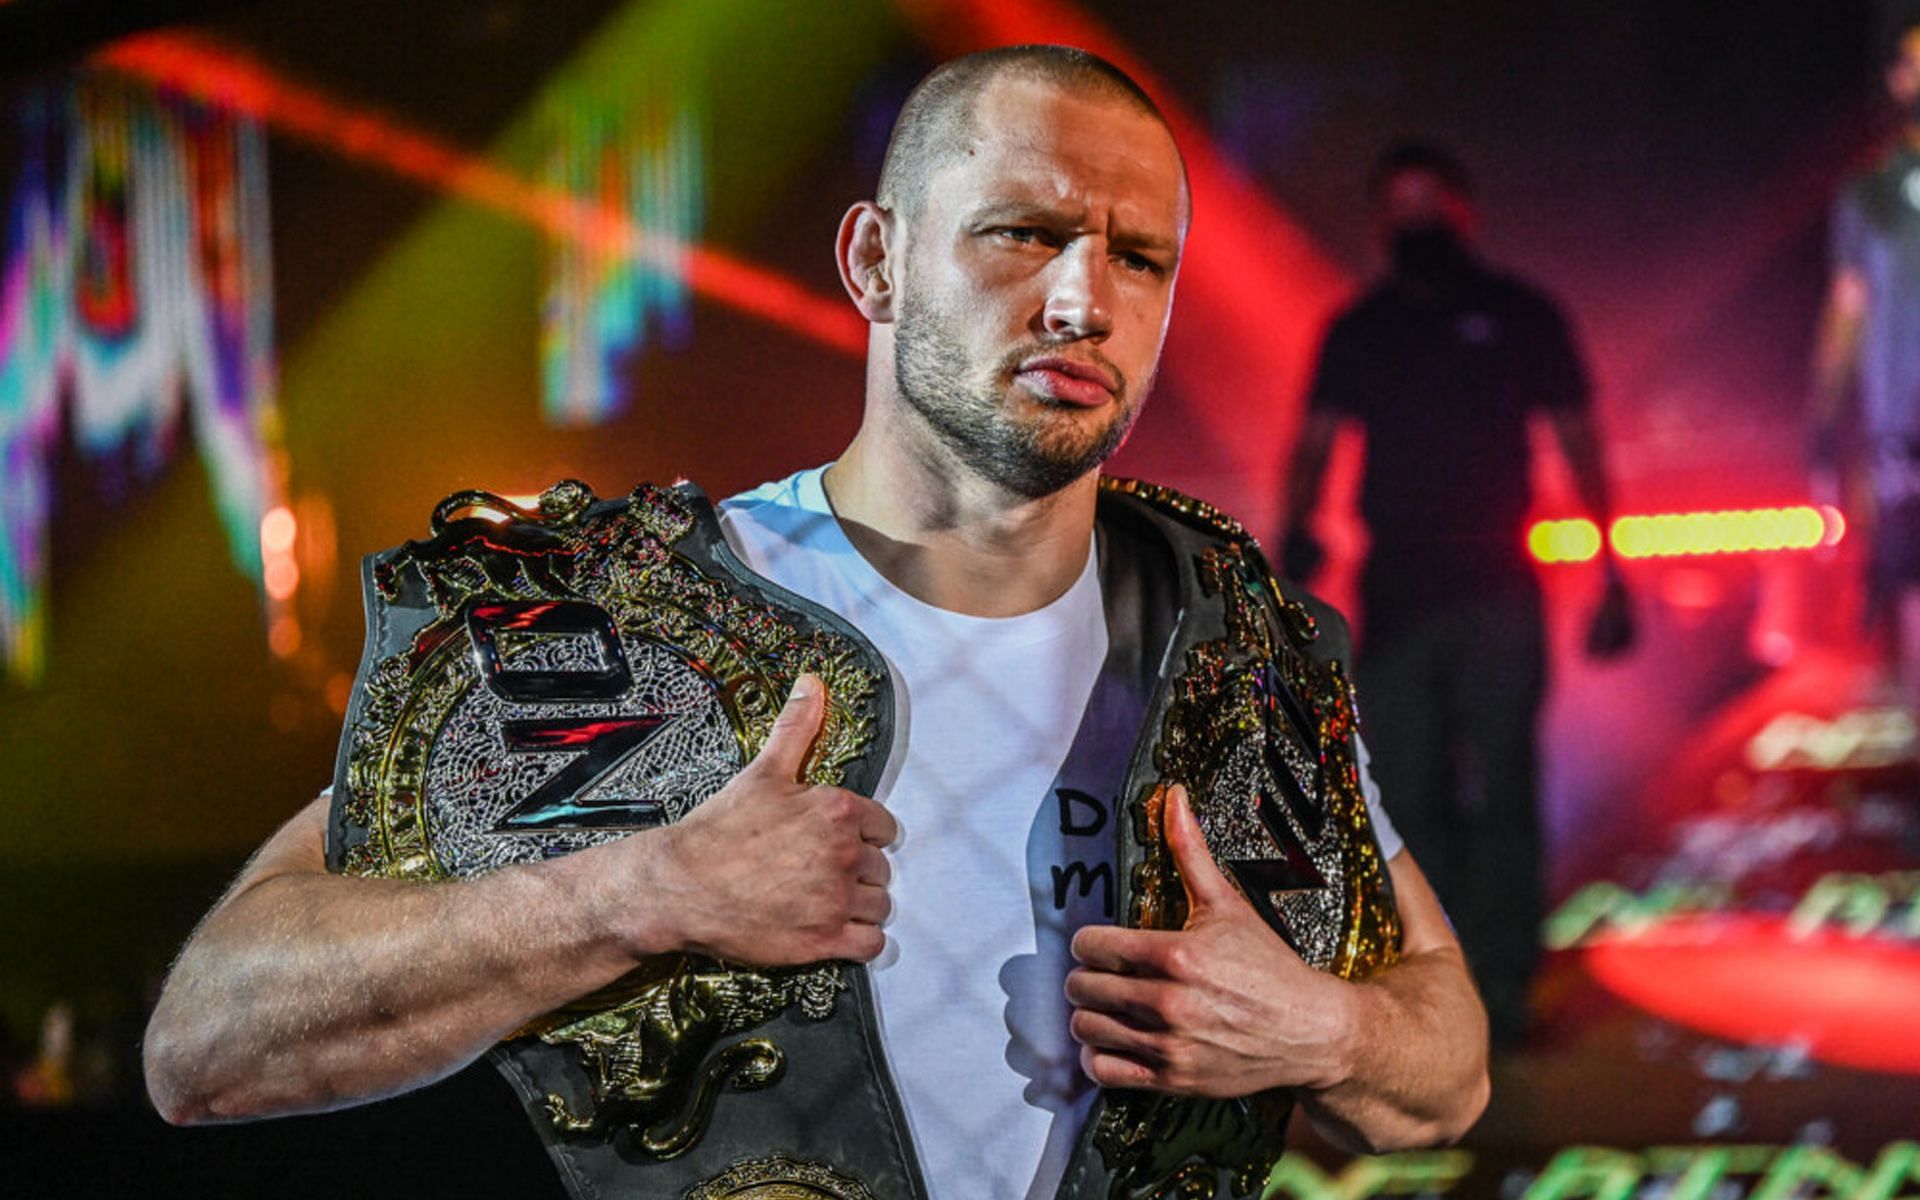 Reinier de Ridder and his world titles are on their way to Singapore soon. | [Photo: ONE Championship]